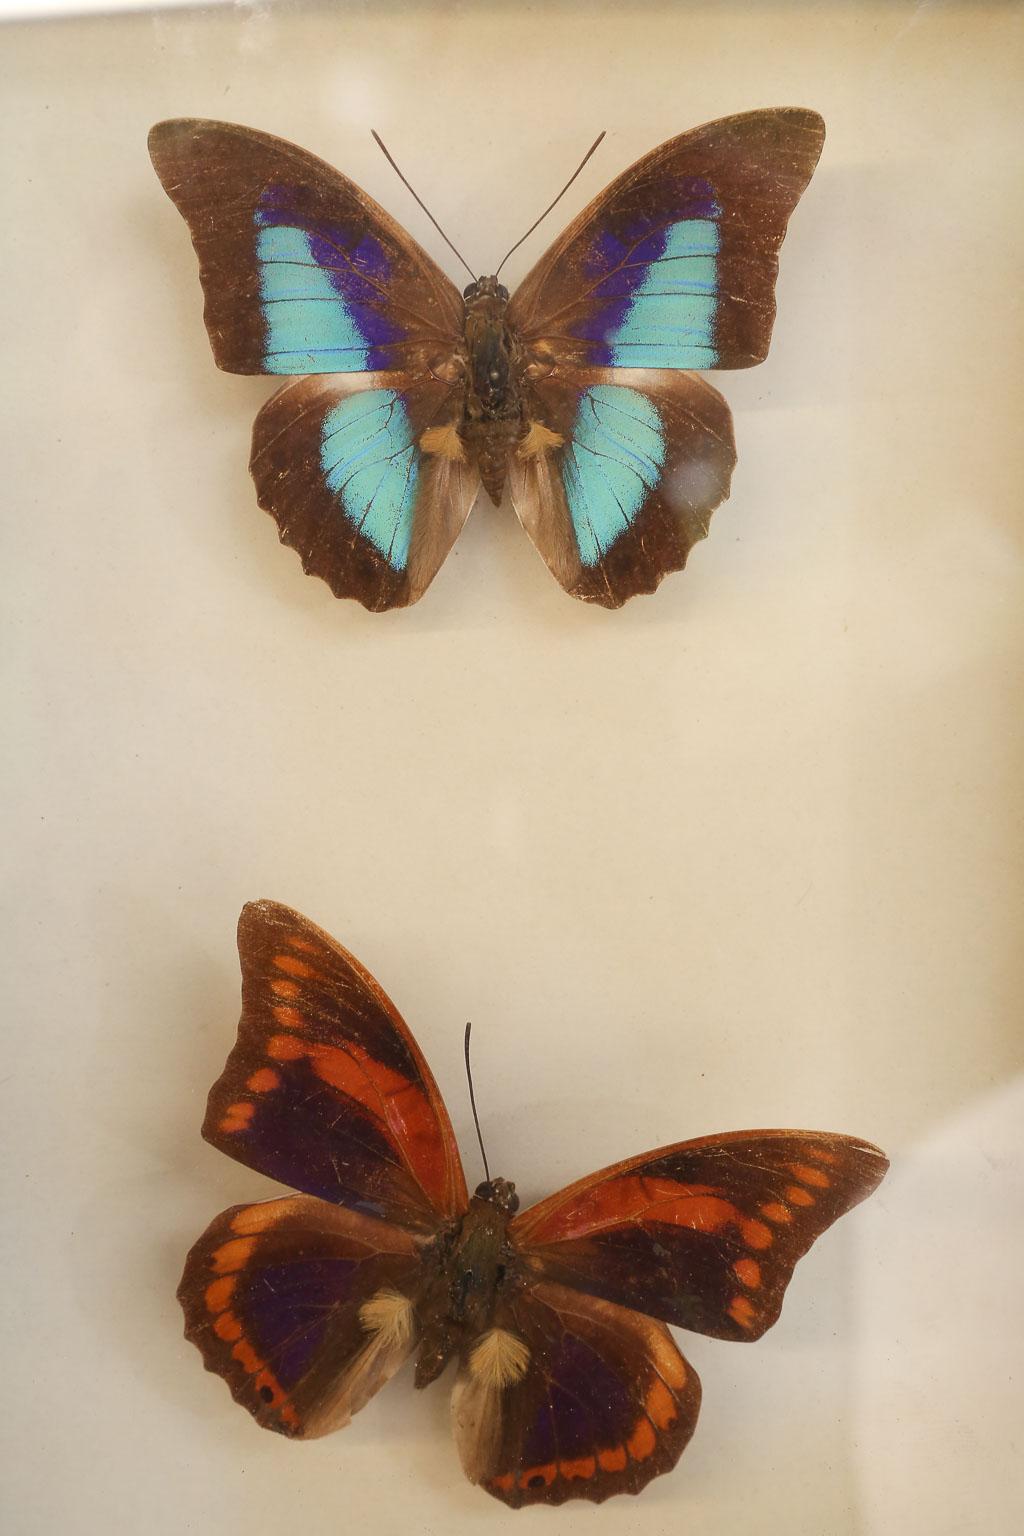 Found in France, this is a lovely butterfly study with two butterflies mounted in a shadow box. Written on the side of the box is the name Omphale Prepona Praneste which is an Andes species of butterfly primarily found in Peru.